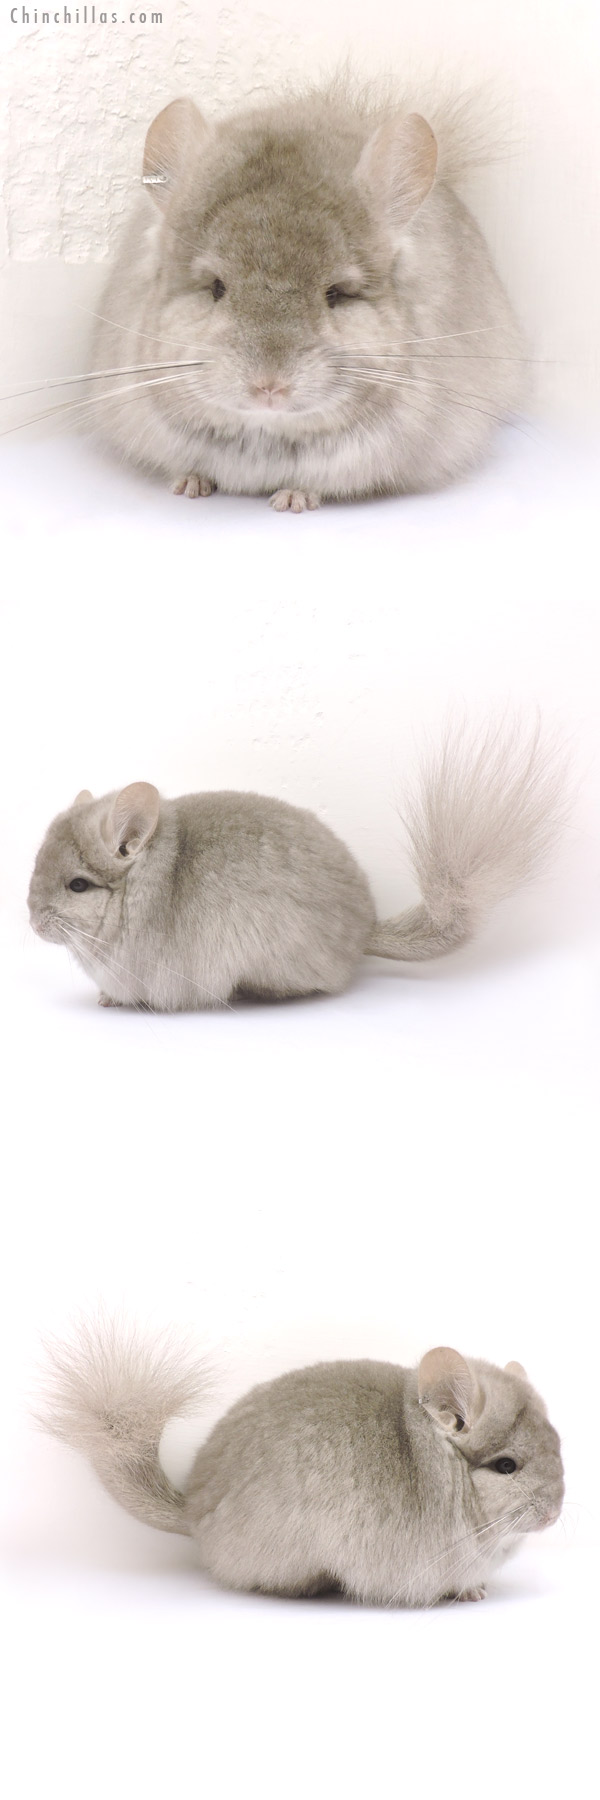 Chinchilla or related item offered for sale or export on Chinchillas.com - 14214 Exceptional Beige  Royal Persian Angora Female Chinchilla